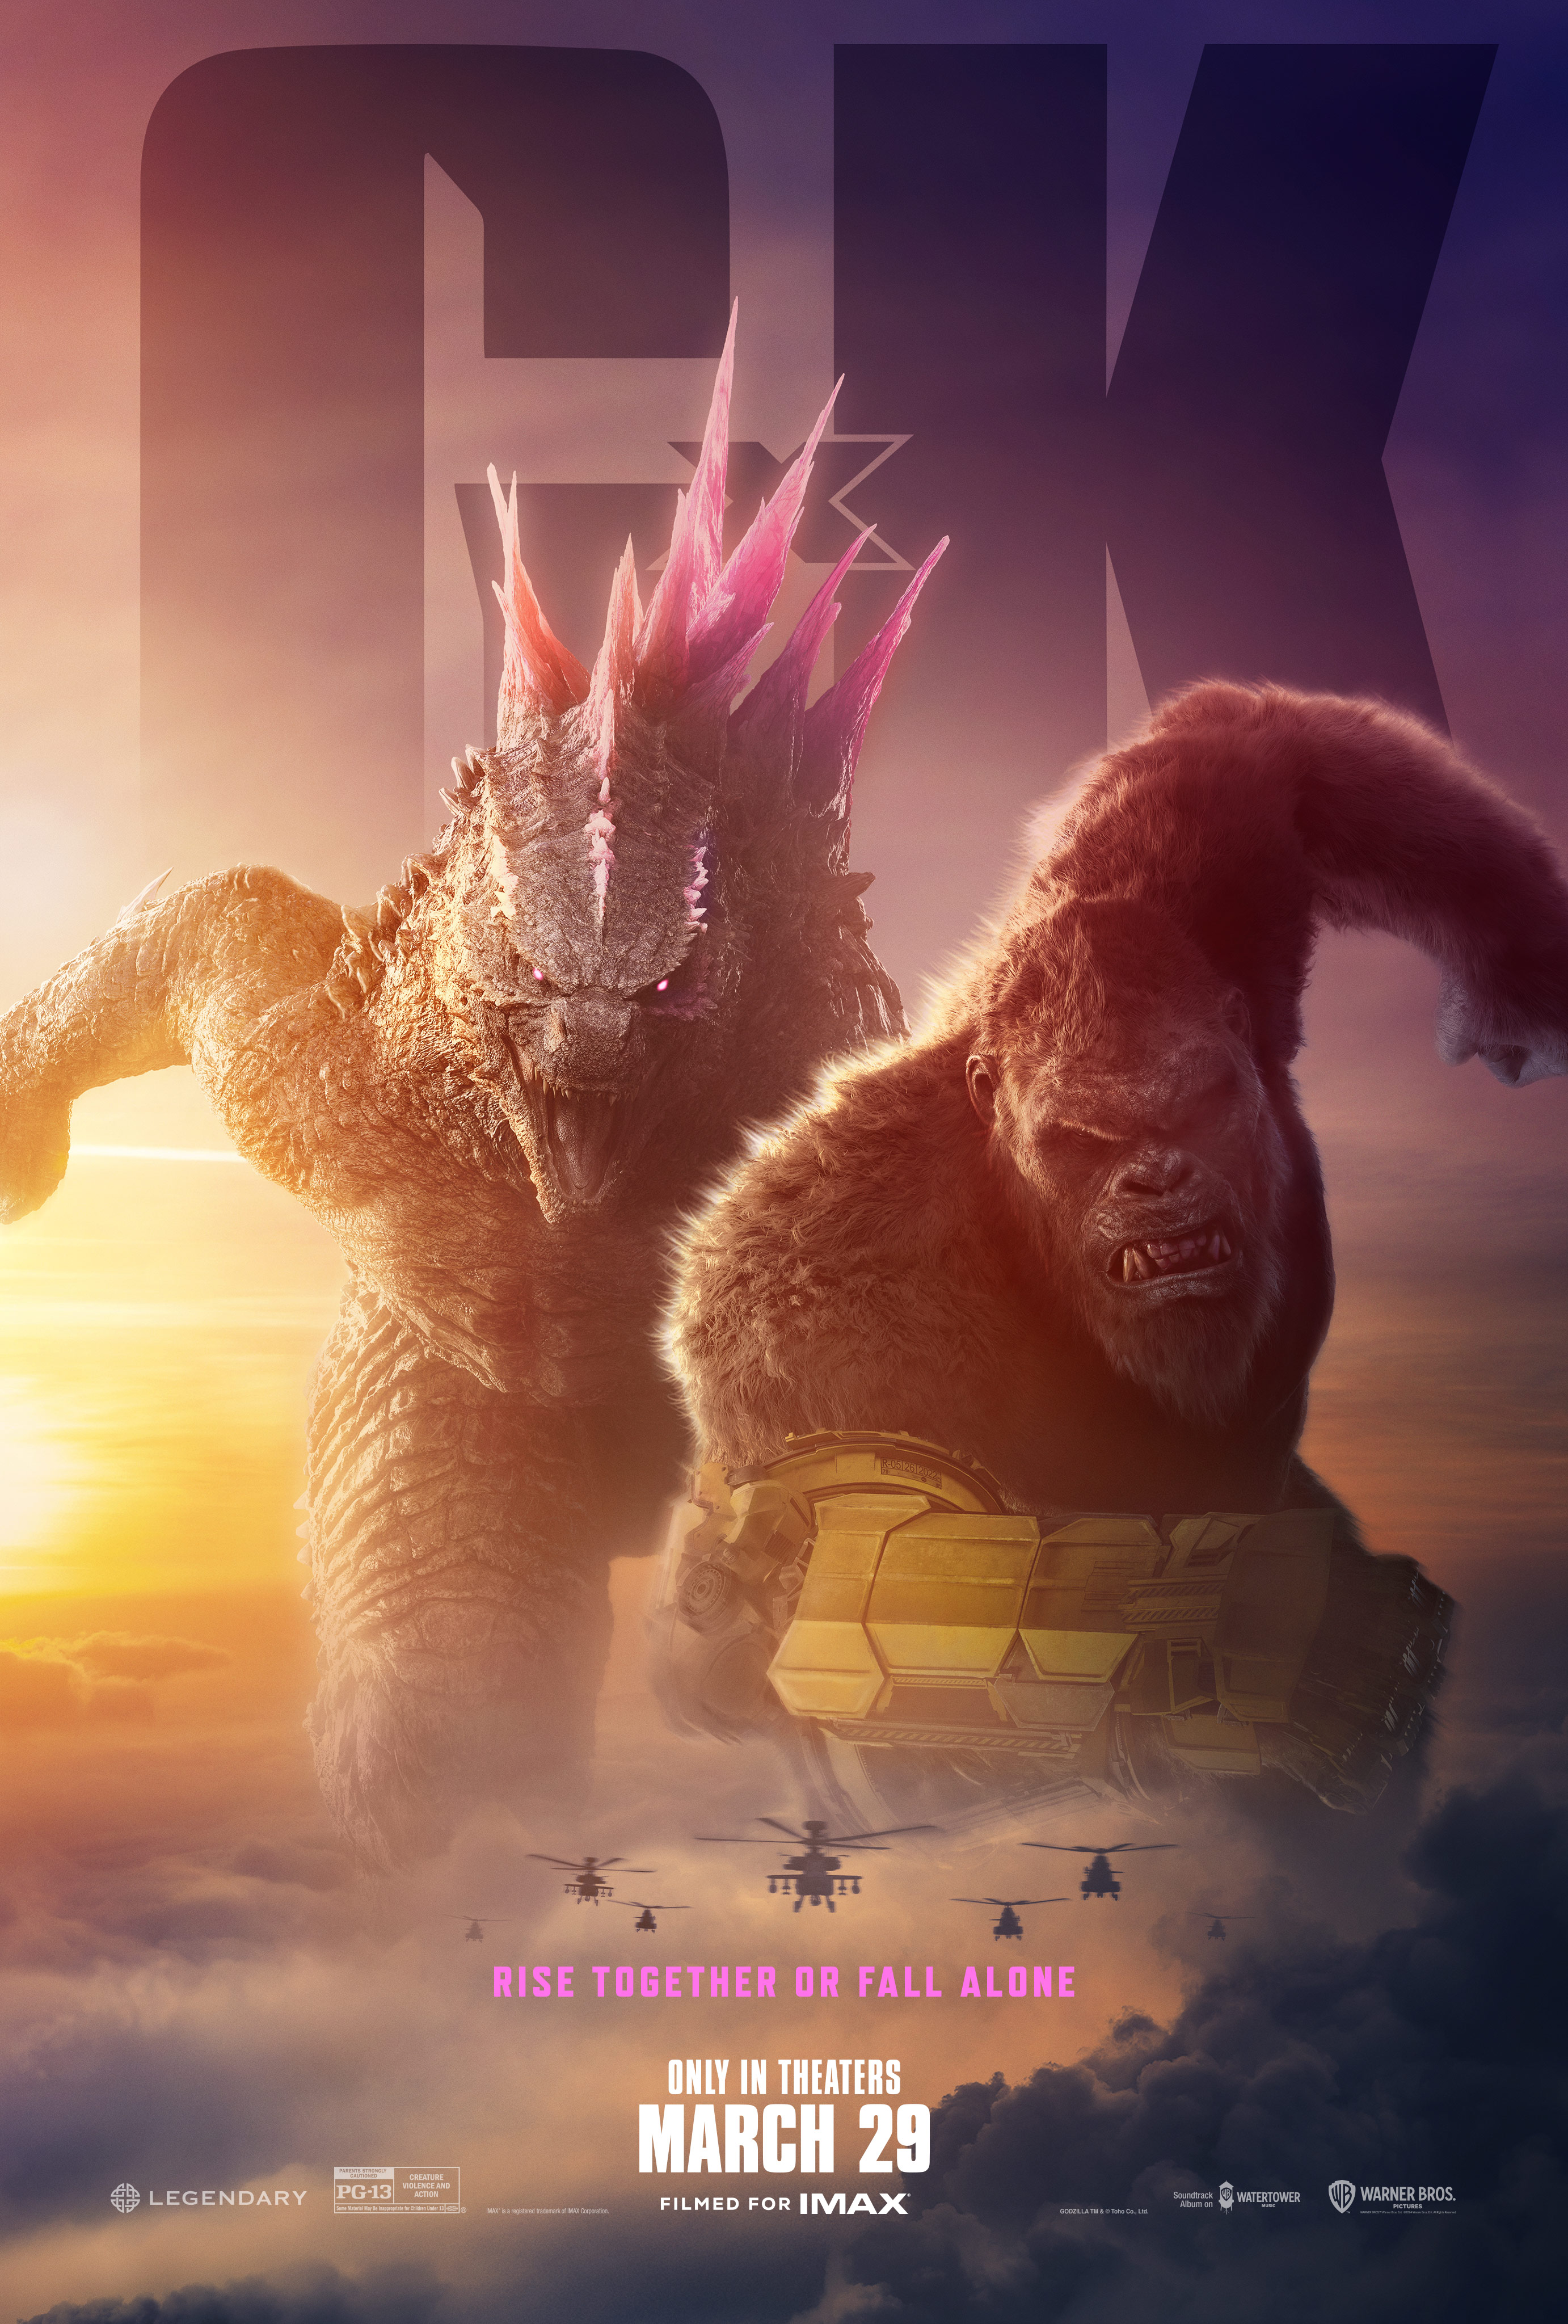 <p>Critics may have loathed "Godzilla x Kong: The New Empire," which scored a 54% rotten rating on Rotten Tomatoes, but fans of the long-running MonsterVerse franchise couldn't stop raving about the fifth installment in the series, which sees the titular kaiju teaming up to face off against a villainous Titan. It banked more than $440M at the box office, making it the third highest-grossing Hollywood film of the year so far after "Dune: Part Two" and "Kung Fu Panda 4." It also scored a 91% fresh rating with audiences on Rotten Tomatoes, proving that sometimes critics are just wrong.</p>